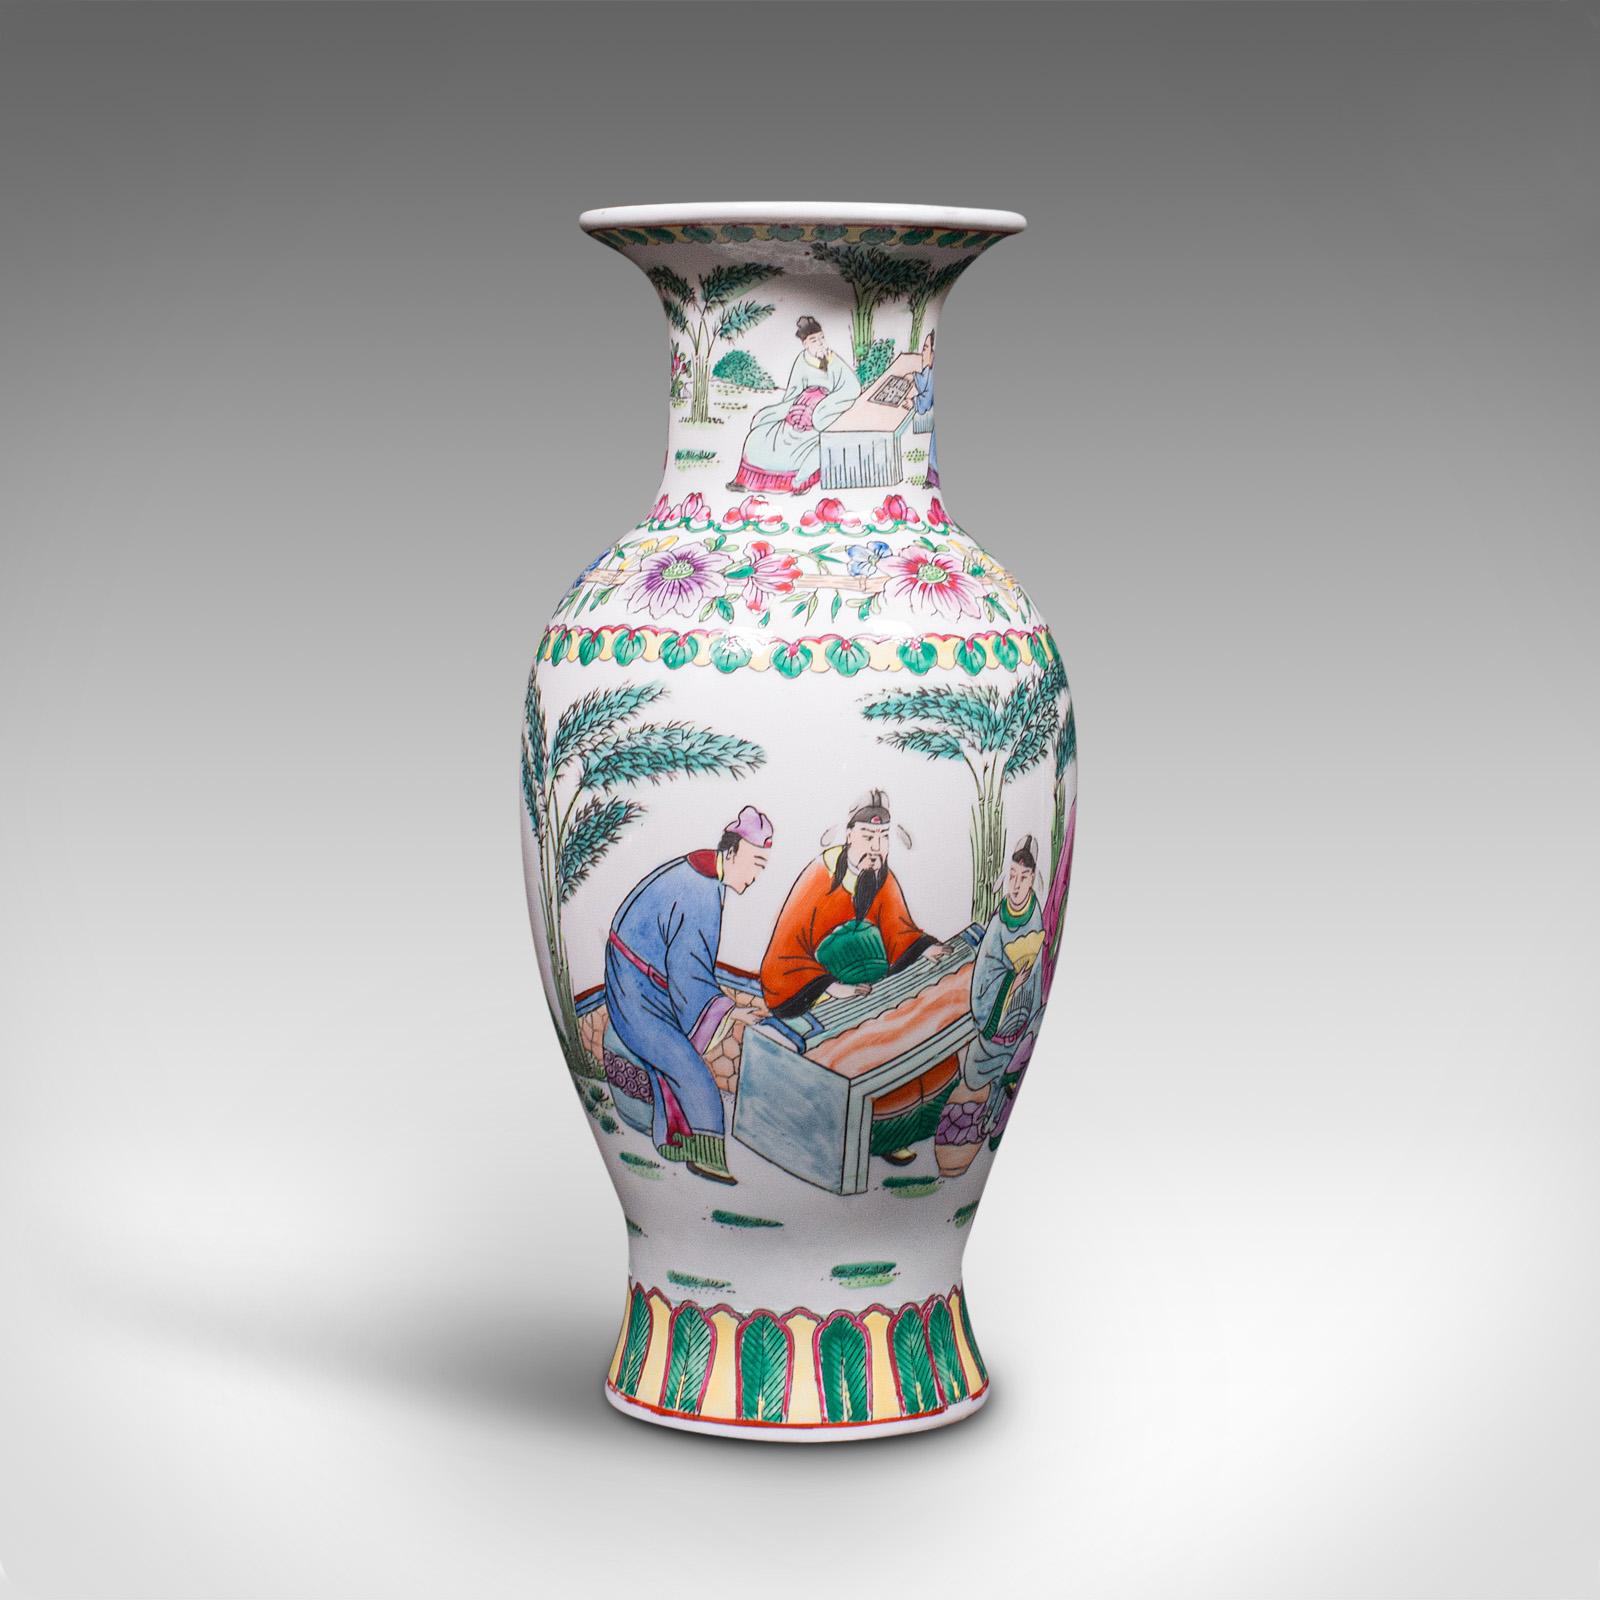 This is an antique posy vase. A Chinese, ceramic baluster urn with hand-painted decoration, dating to the late Victorian period, circa 1900.

Charming vase with fine detail and cheerful colour
Displays a desirable aged patina throughout
Crisp